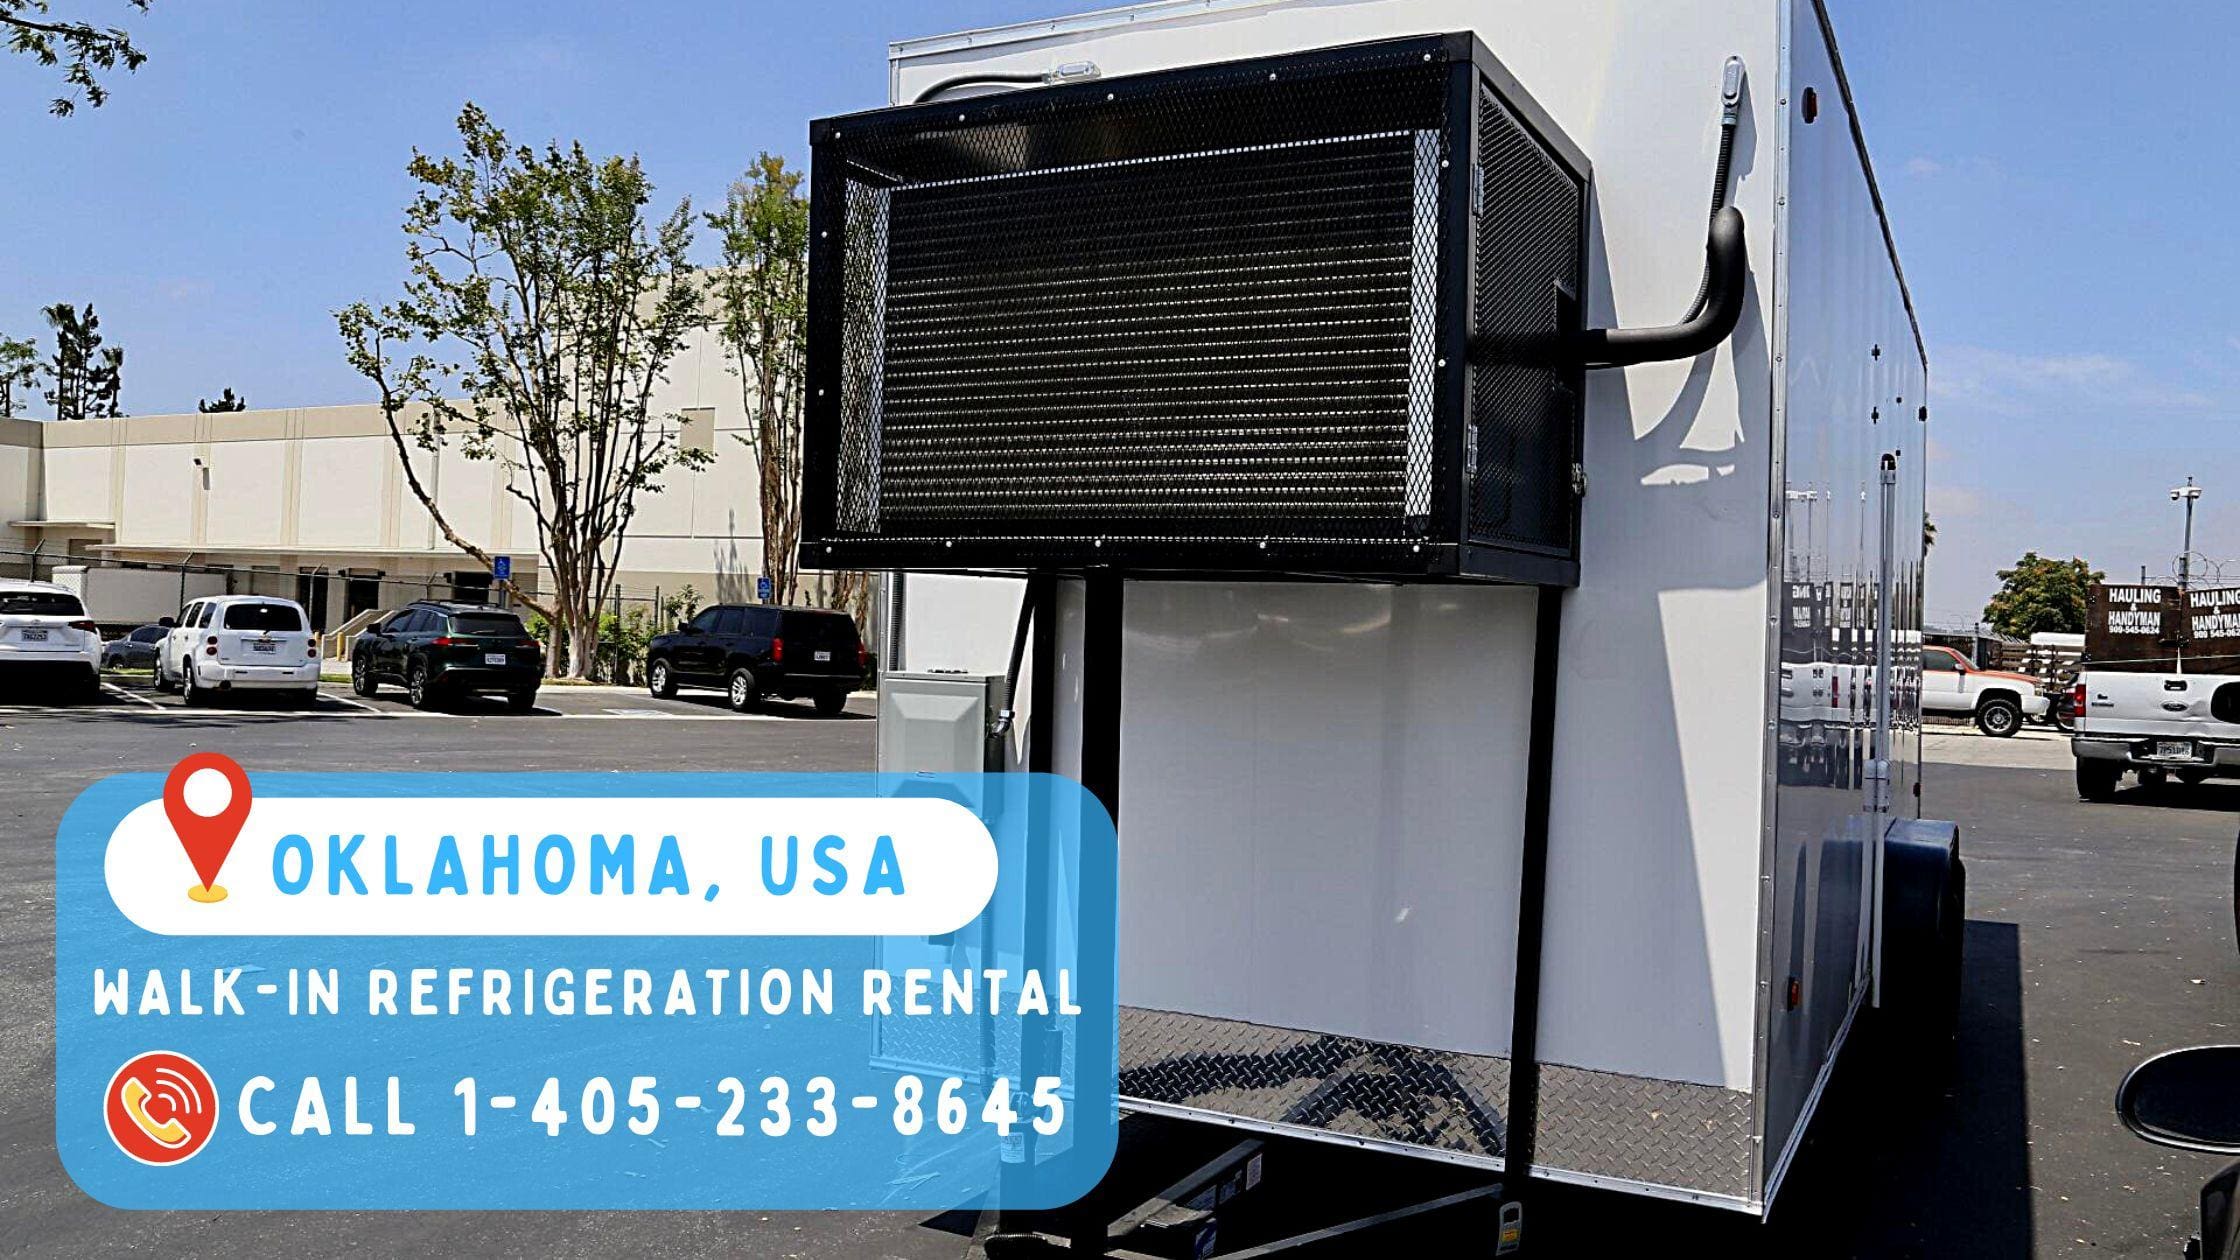 Portable Refrigeration Cooler for rent in Oklahoma, ICE FOX Equipment